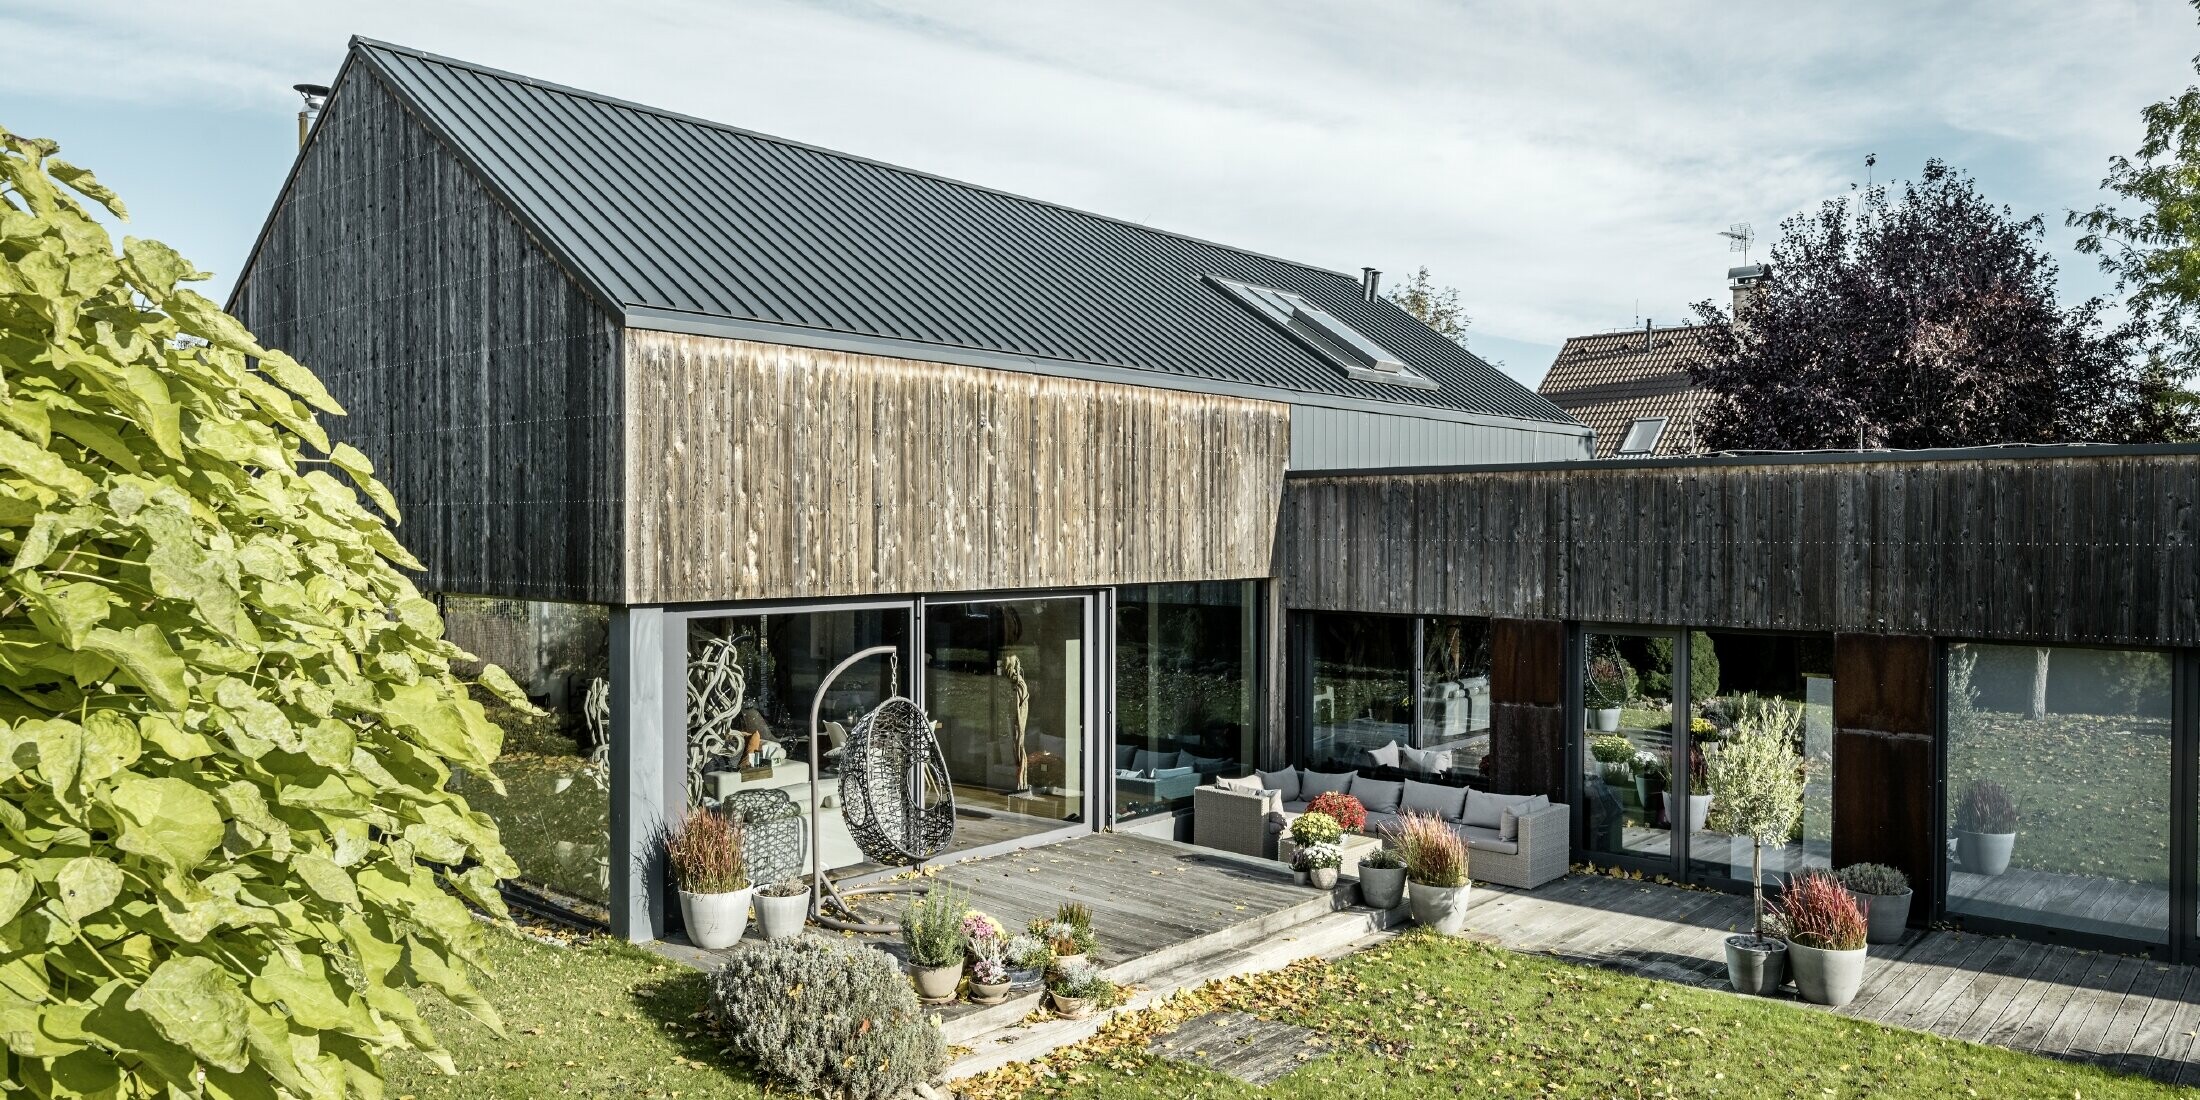 Detached house with gable roof, covered with PREFALZ double standing seam in anthracite and weathered wooden façade. With a beautiful wooden terrace and large windows on the ground floor.